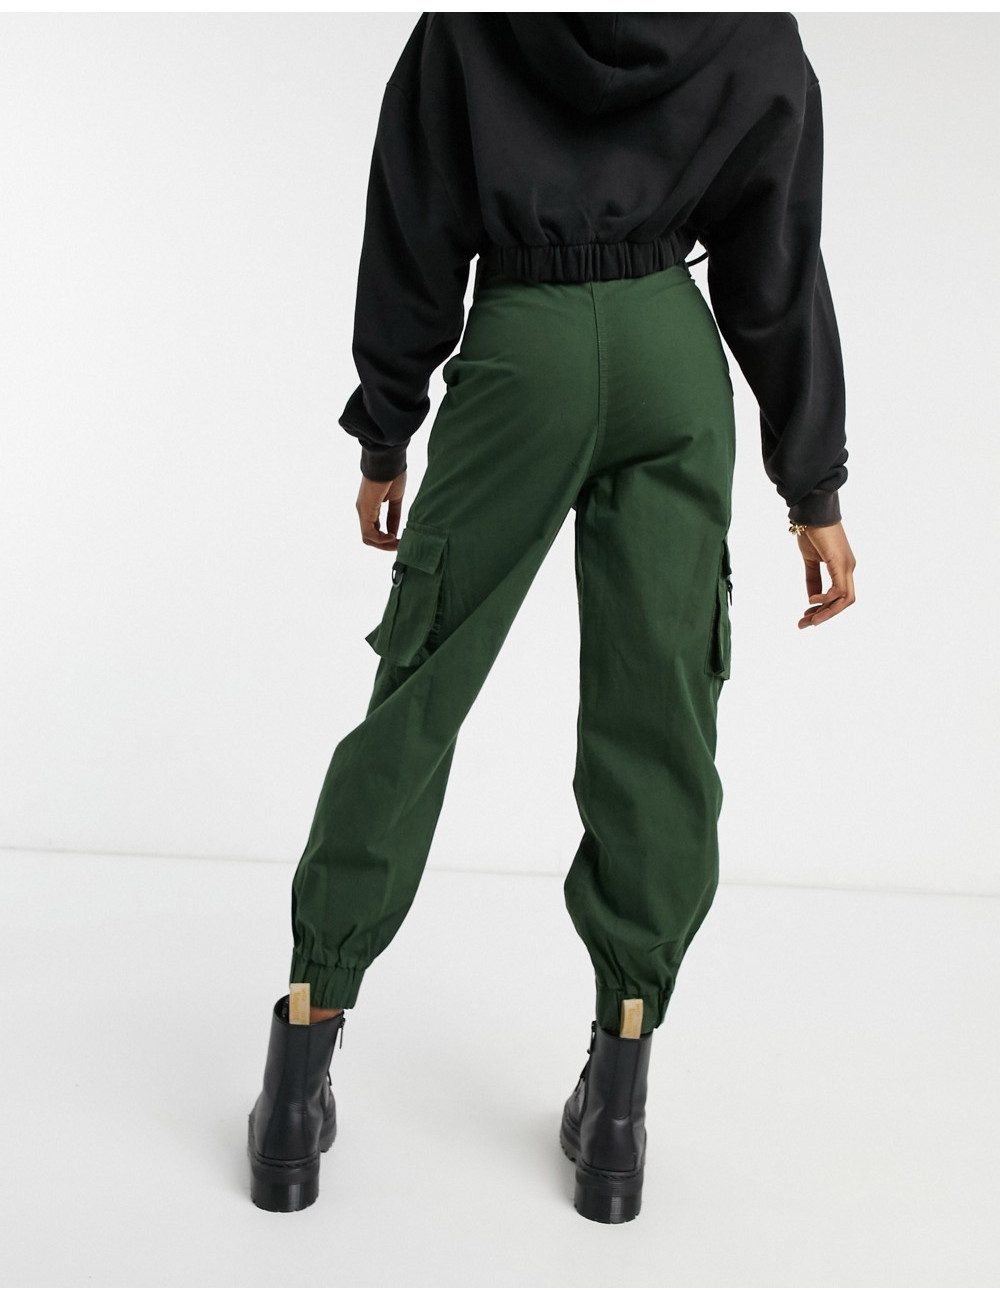 COLLUSION cargo trousers in...